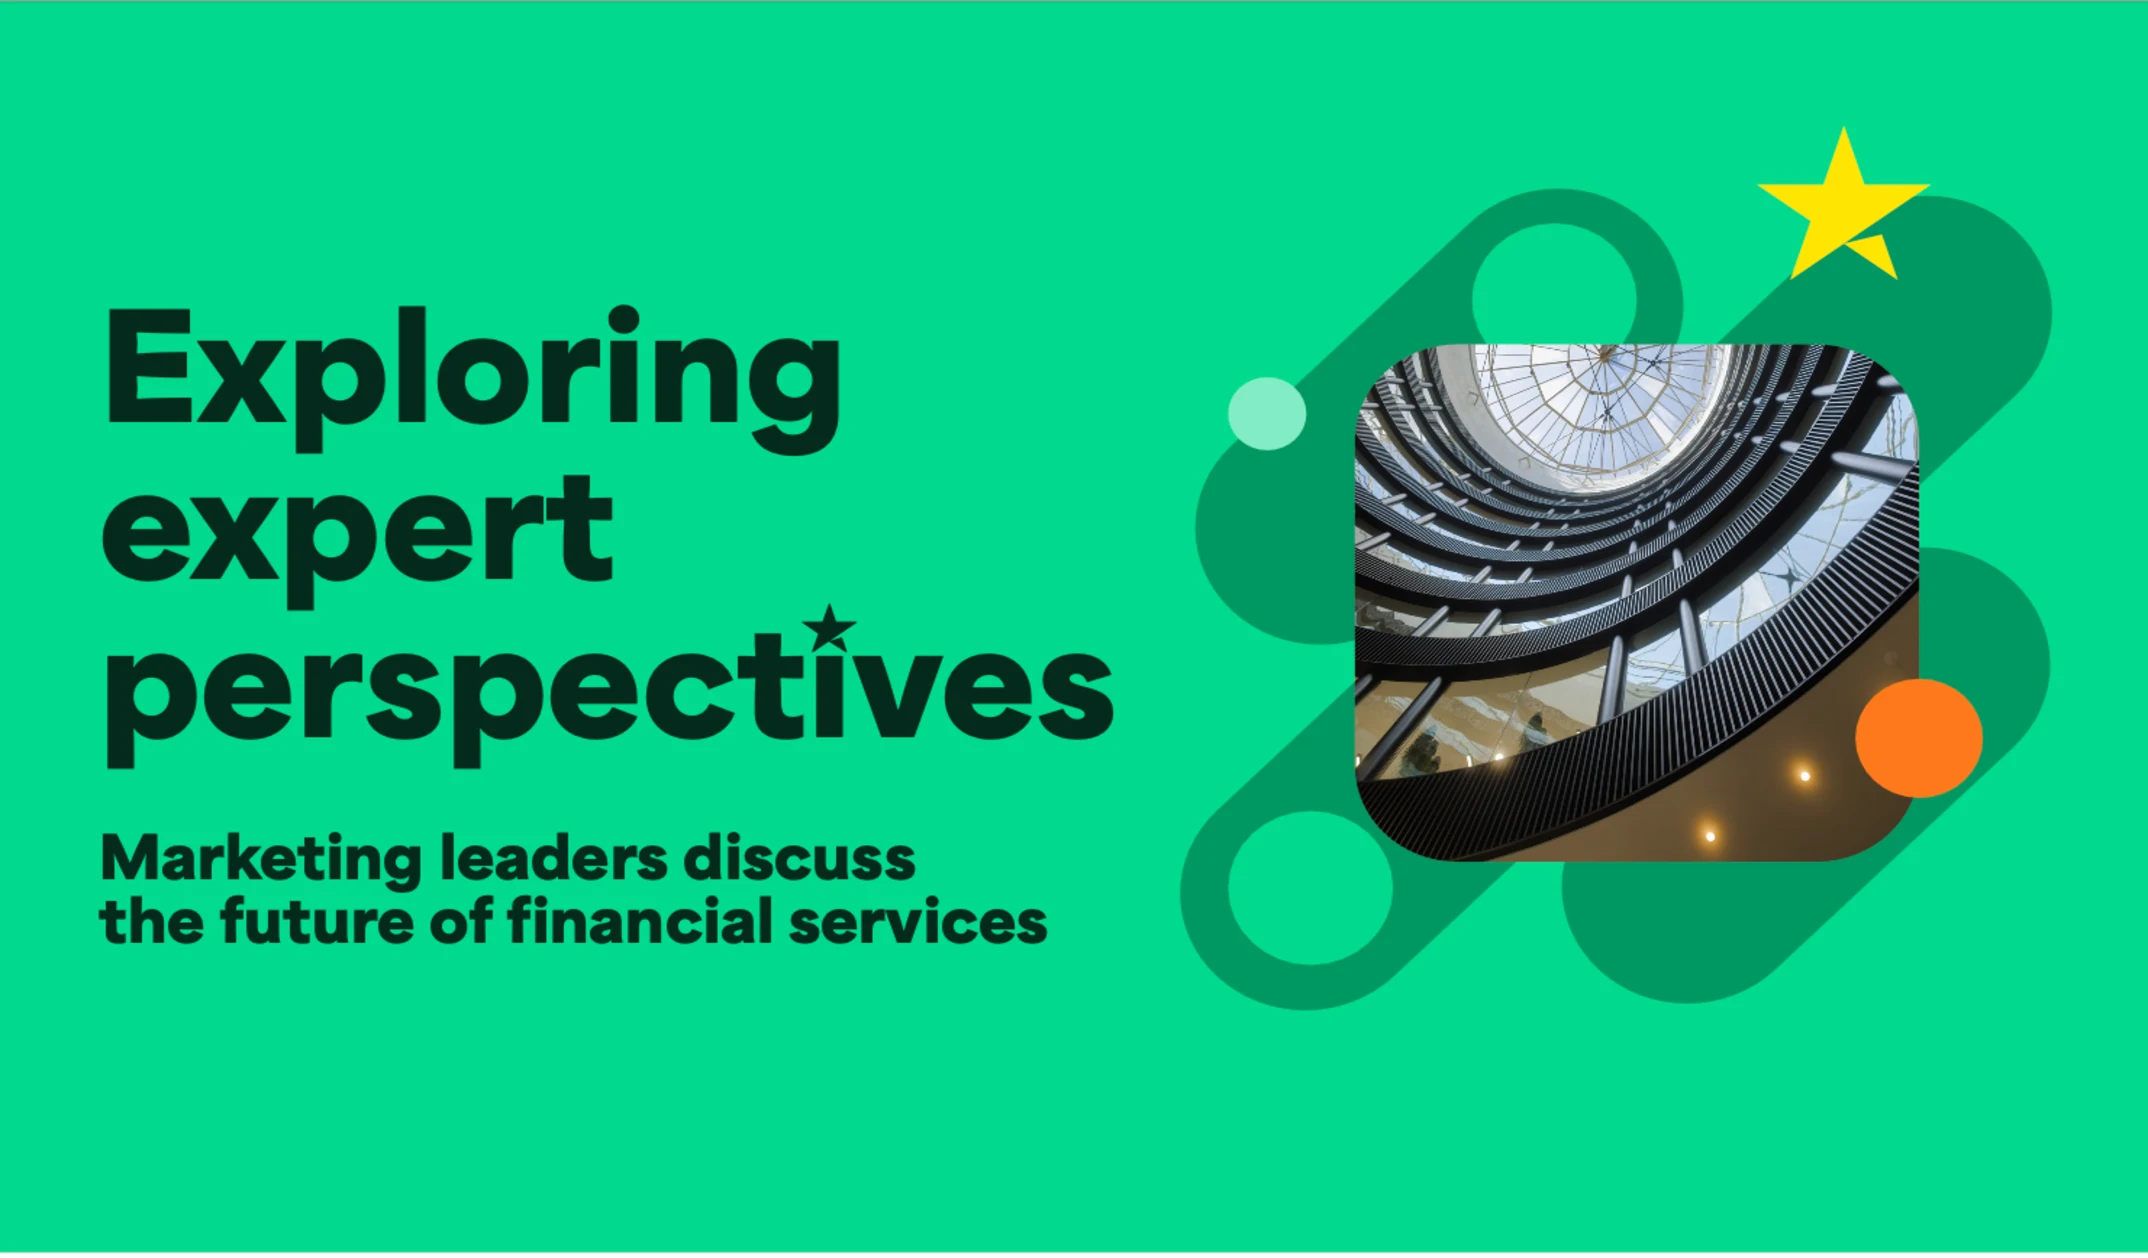 Exploring expert perspectives: Marketing leaders discuss the future of financial services